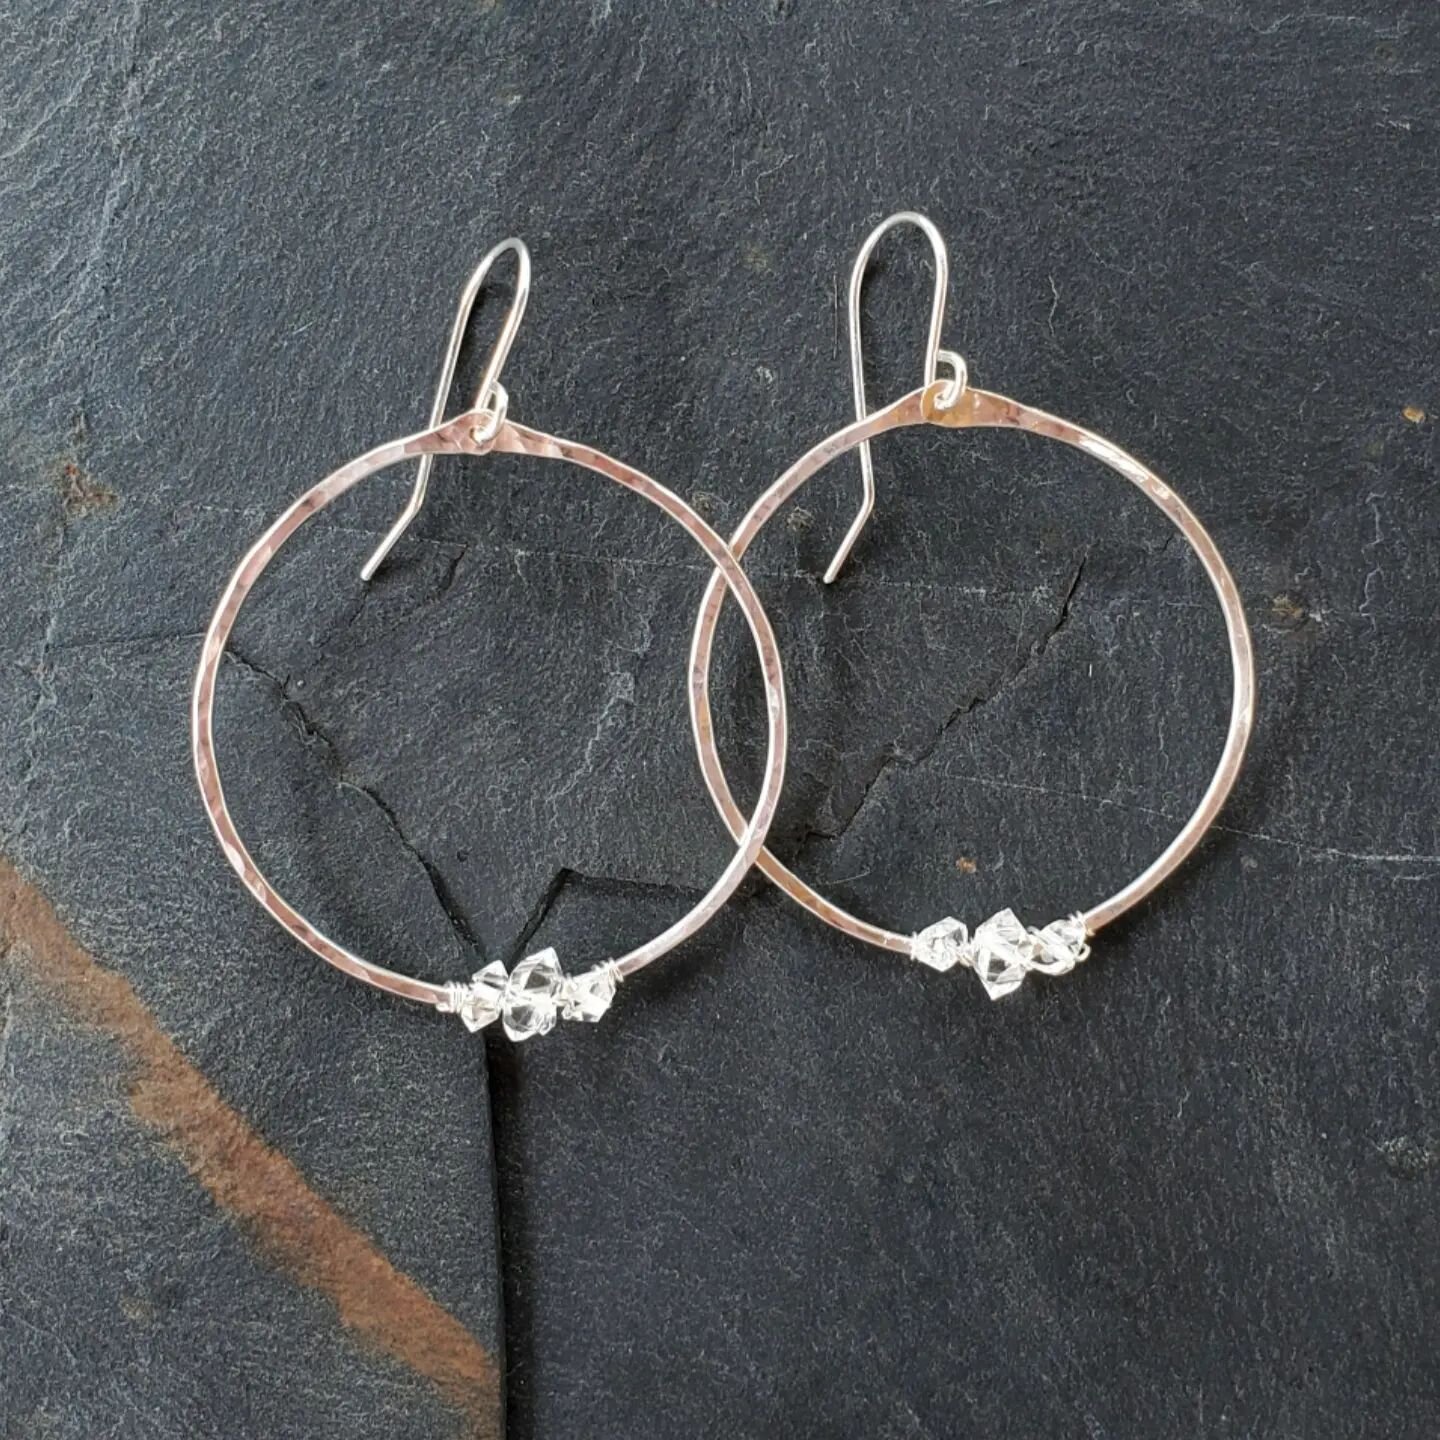 NEW!! Just added these silver hoops with little Herkimer diamonds to the website! Shop these hoops and more new arrivals at badaliacreations.com